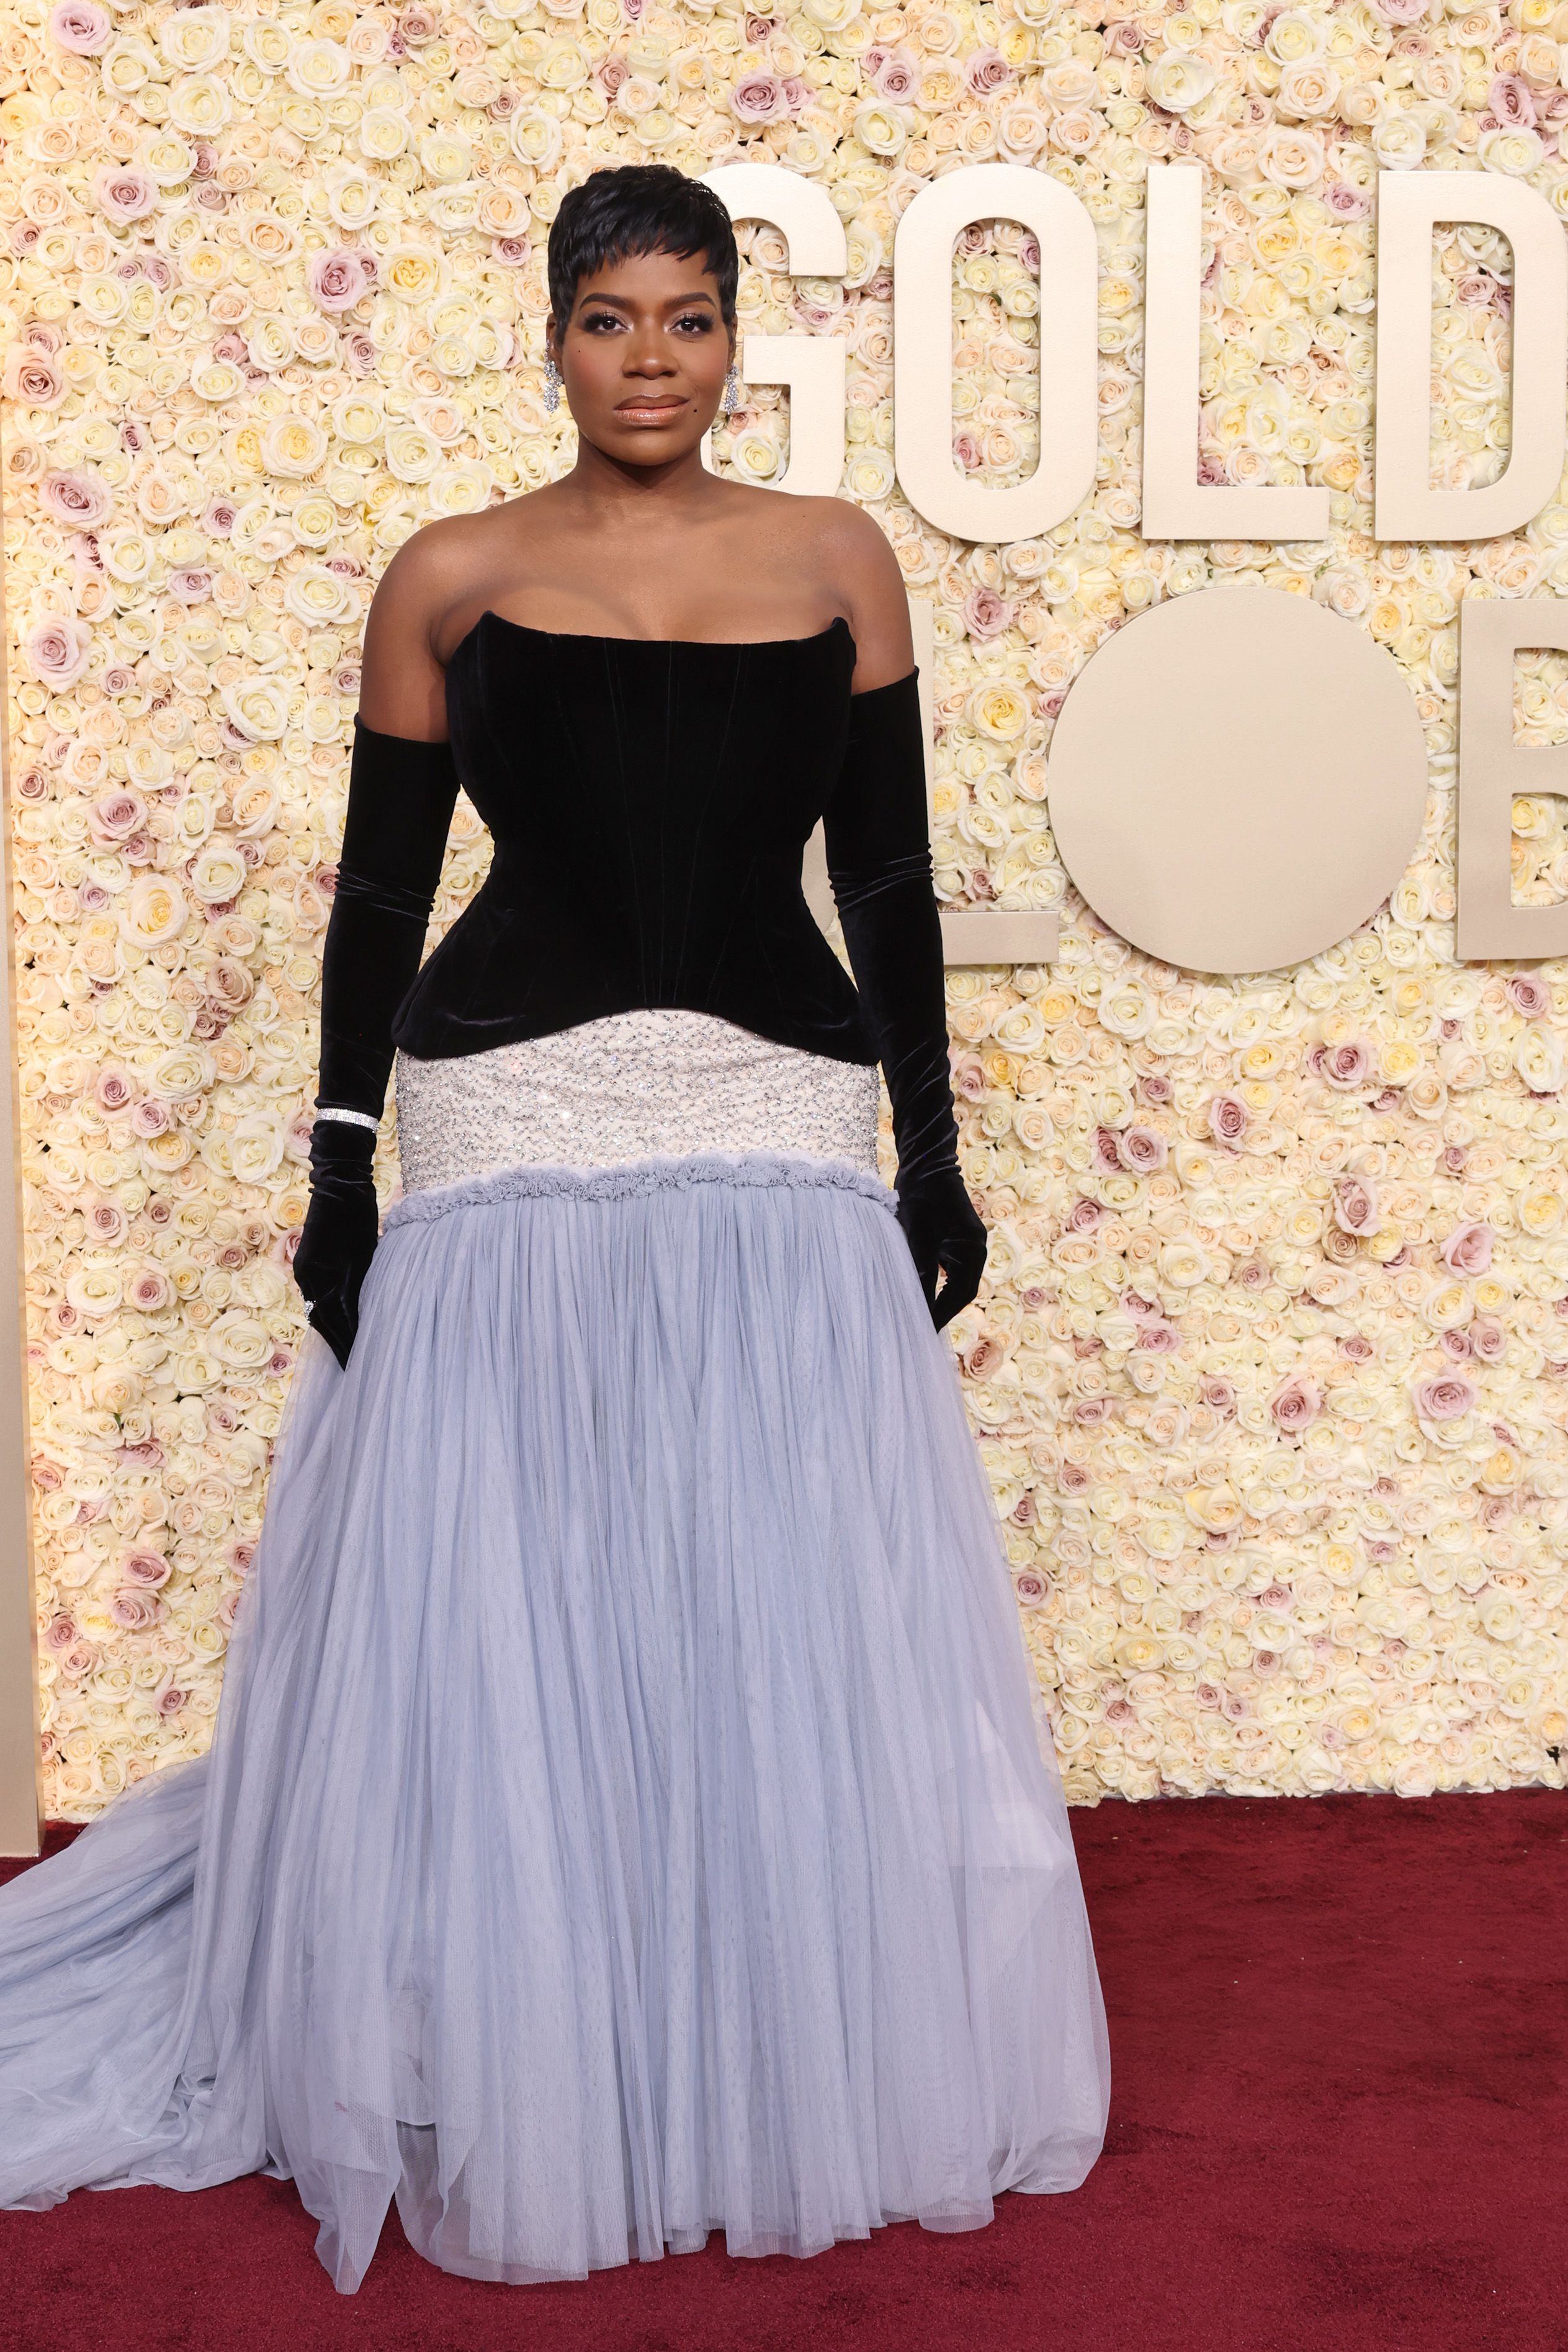 The 20 Best Dressed Celebrities on the Oscars 2020 Red Carpet | Vogue